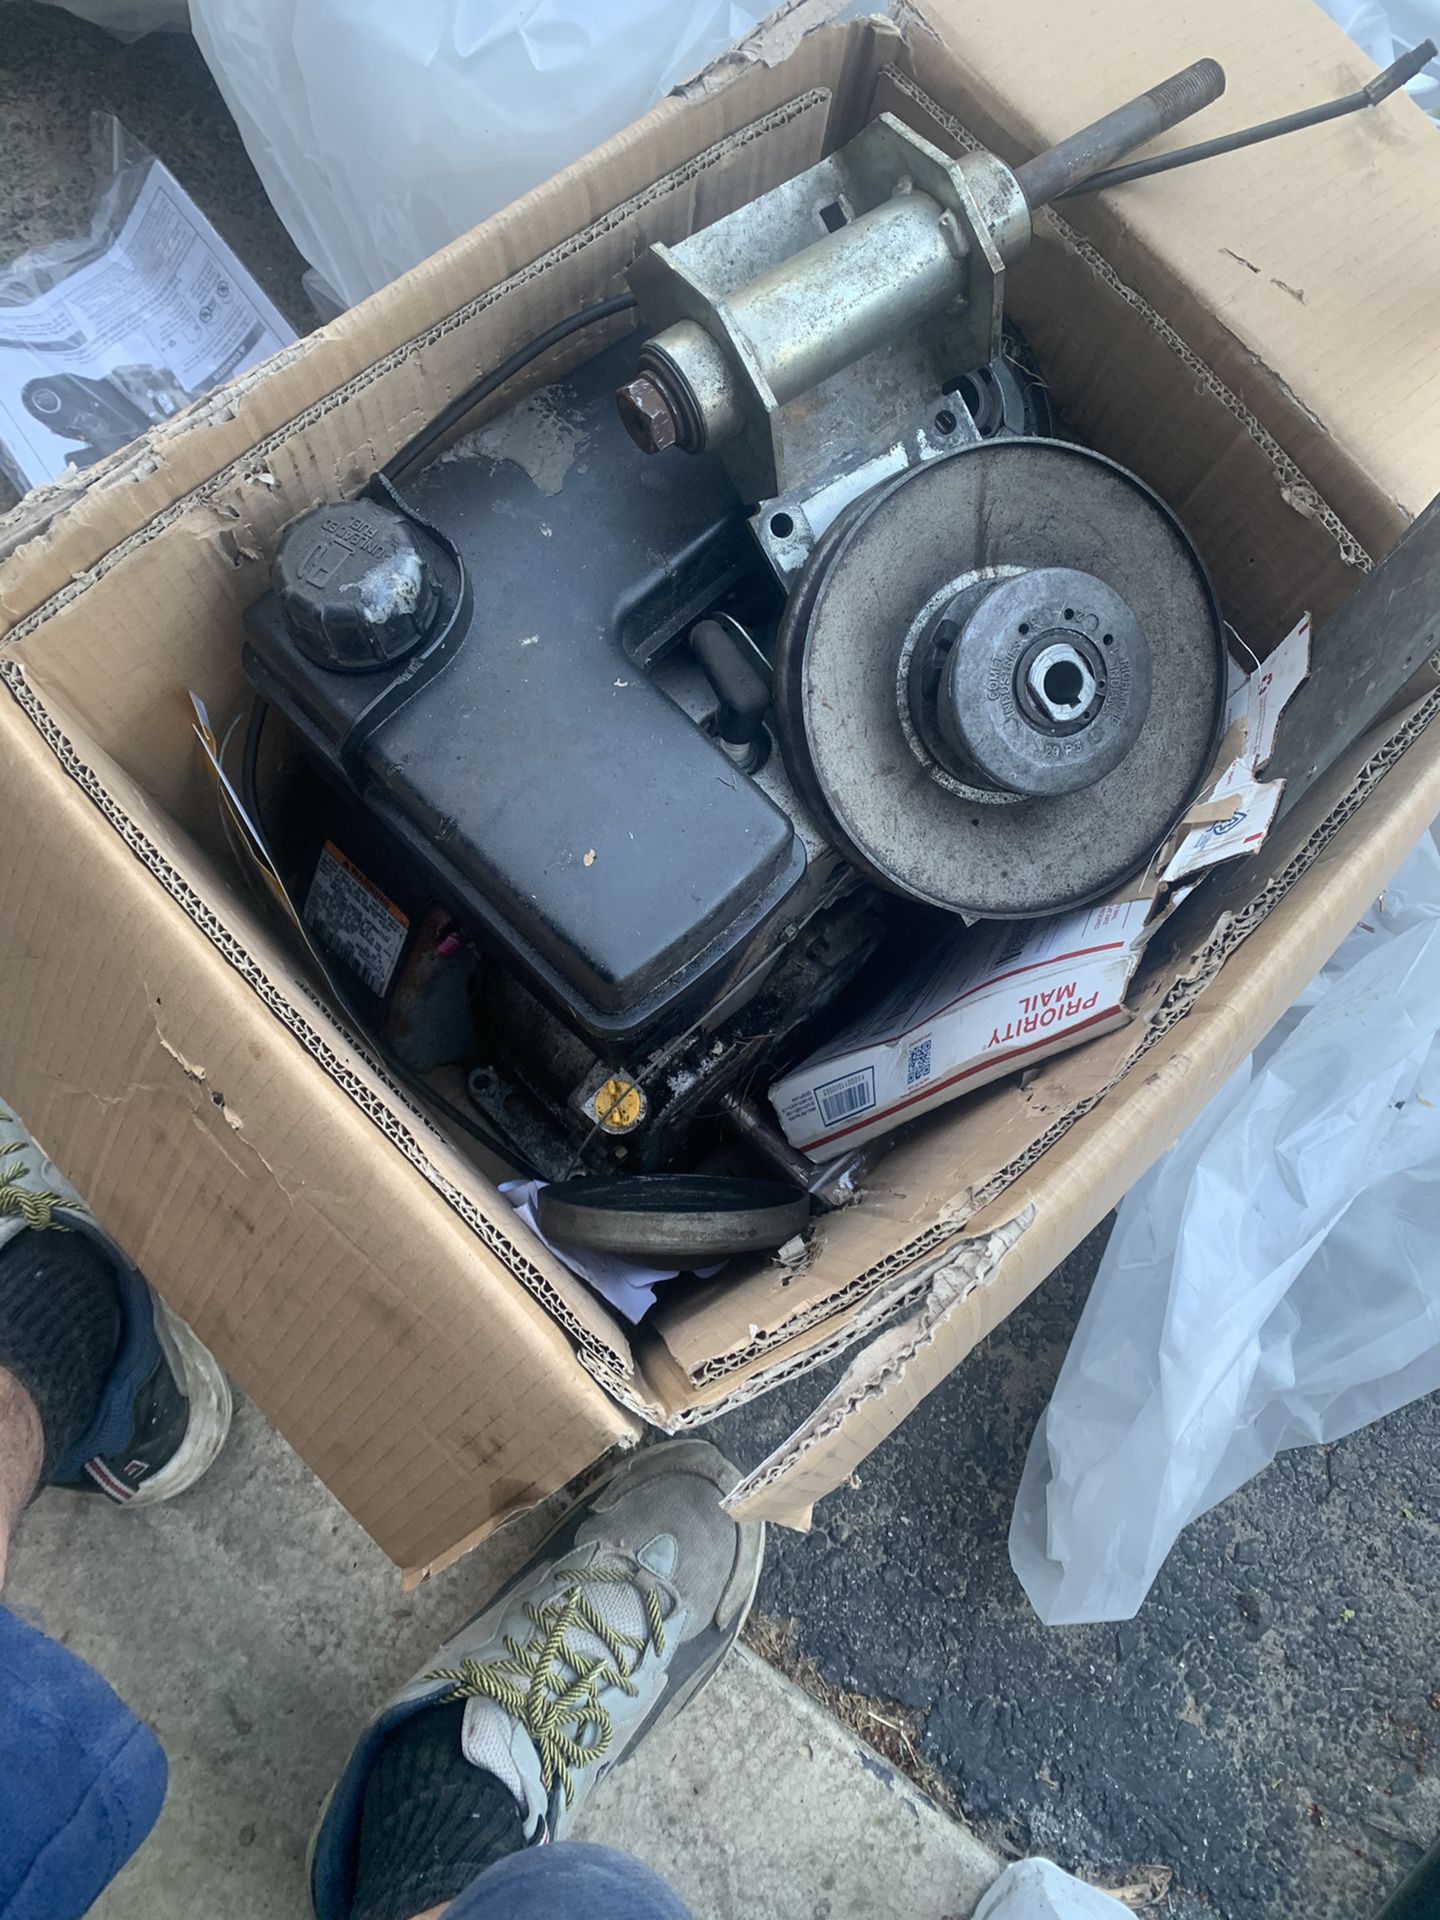 Go kart engine and parts